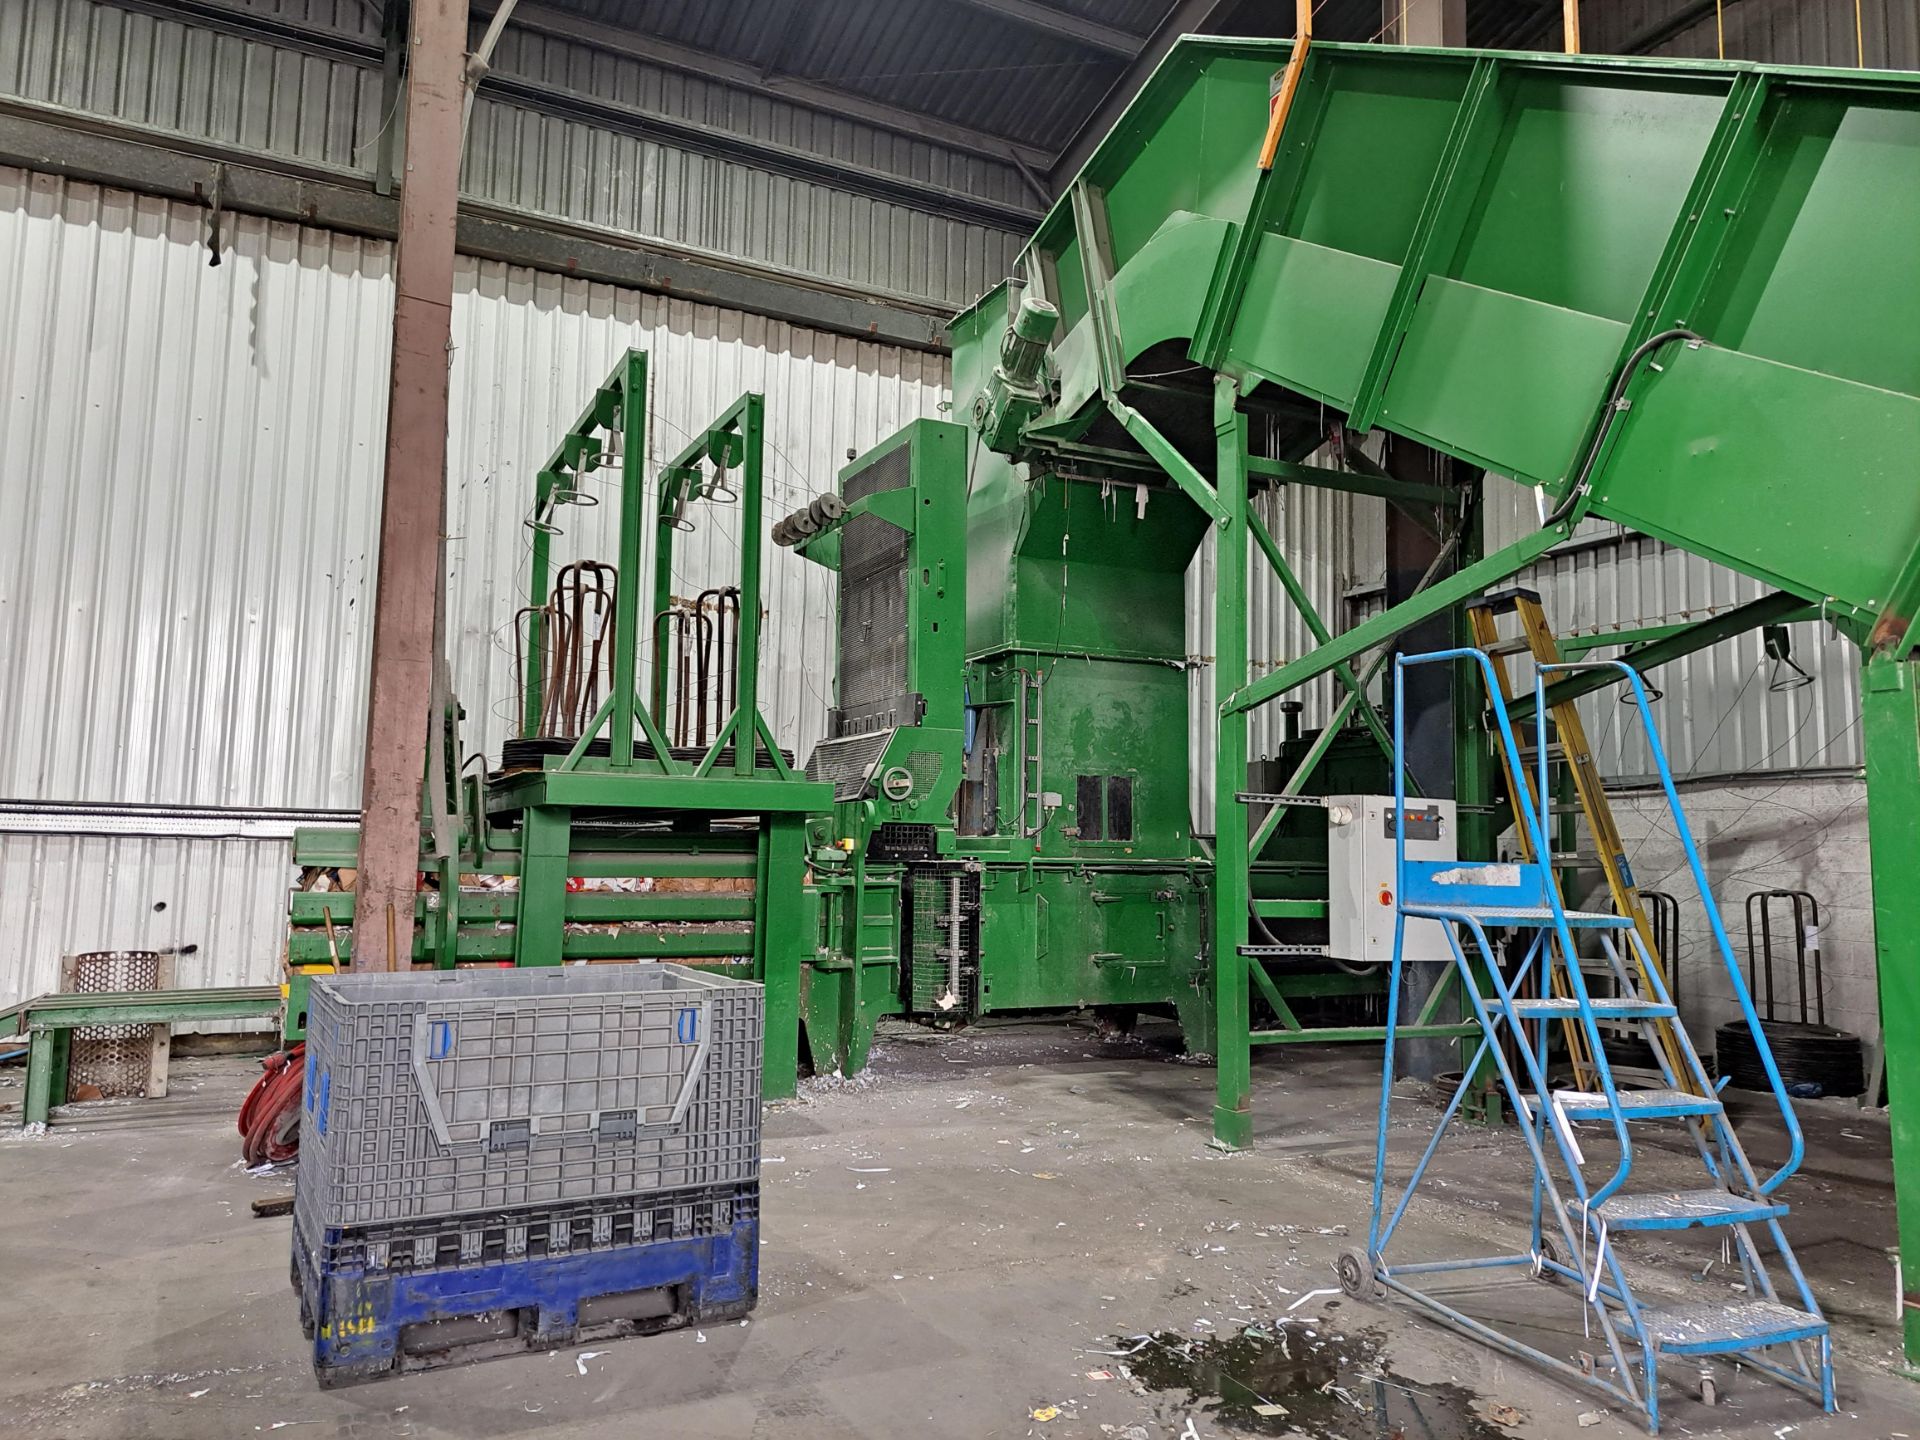 BOA IMPRESS S60 Baling Press with Swan Neck Conveyor and Safetec Safety System - Image 2 of 4